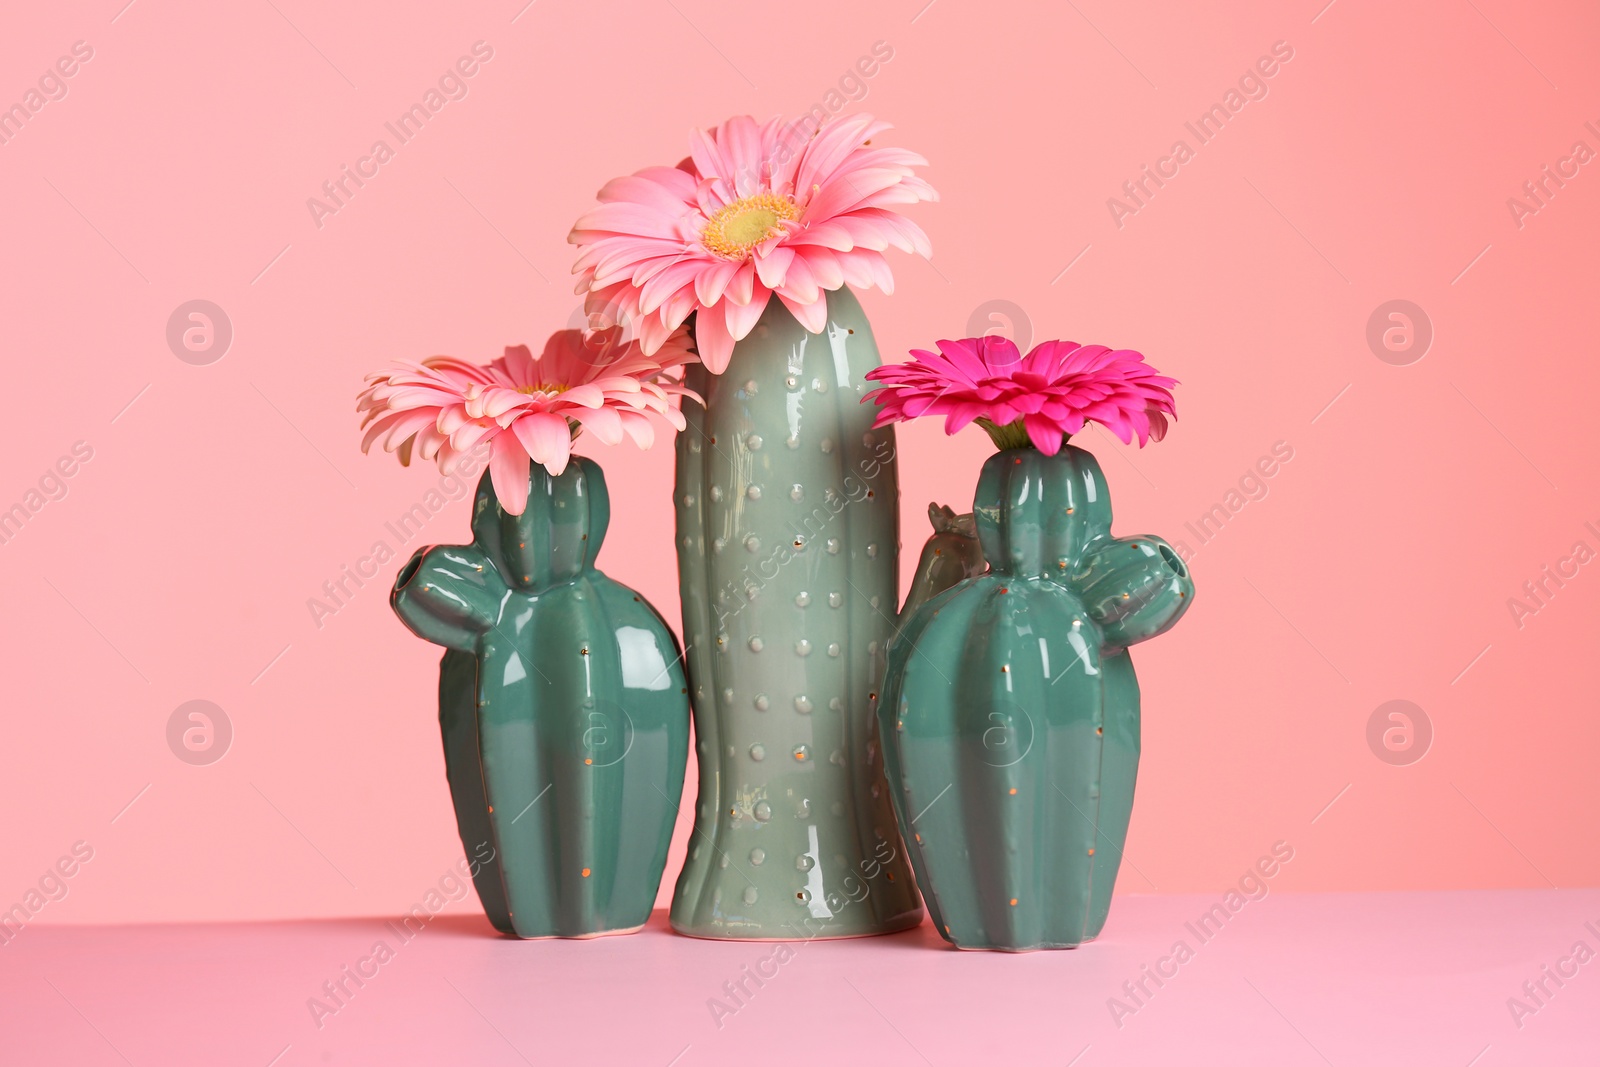 Photo of Decorative cacti and flowers on table against color background. International Women's Day